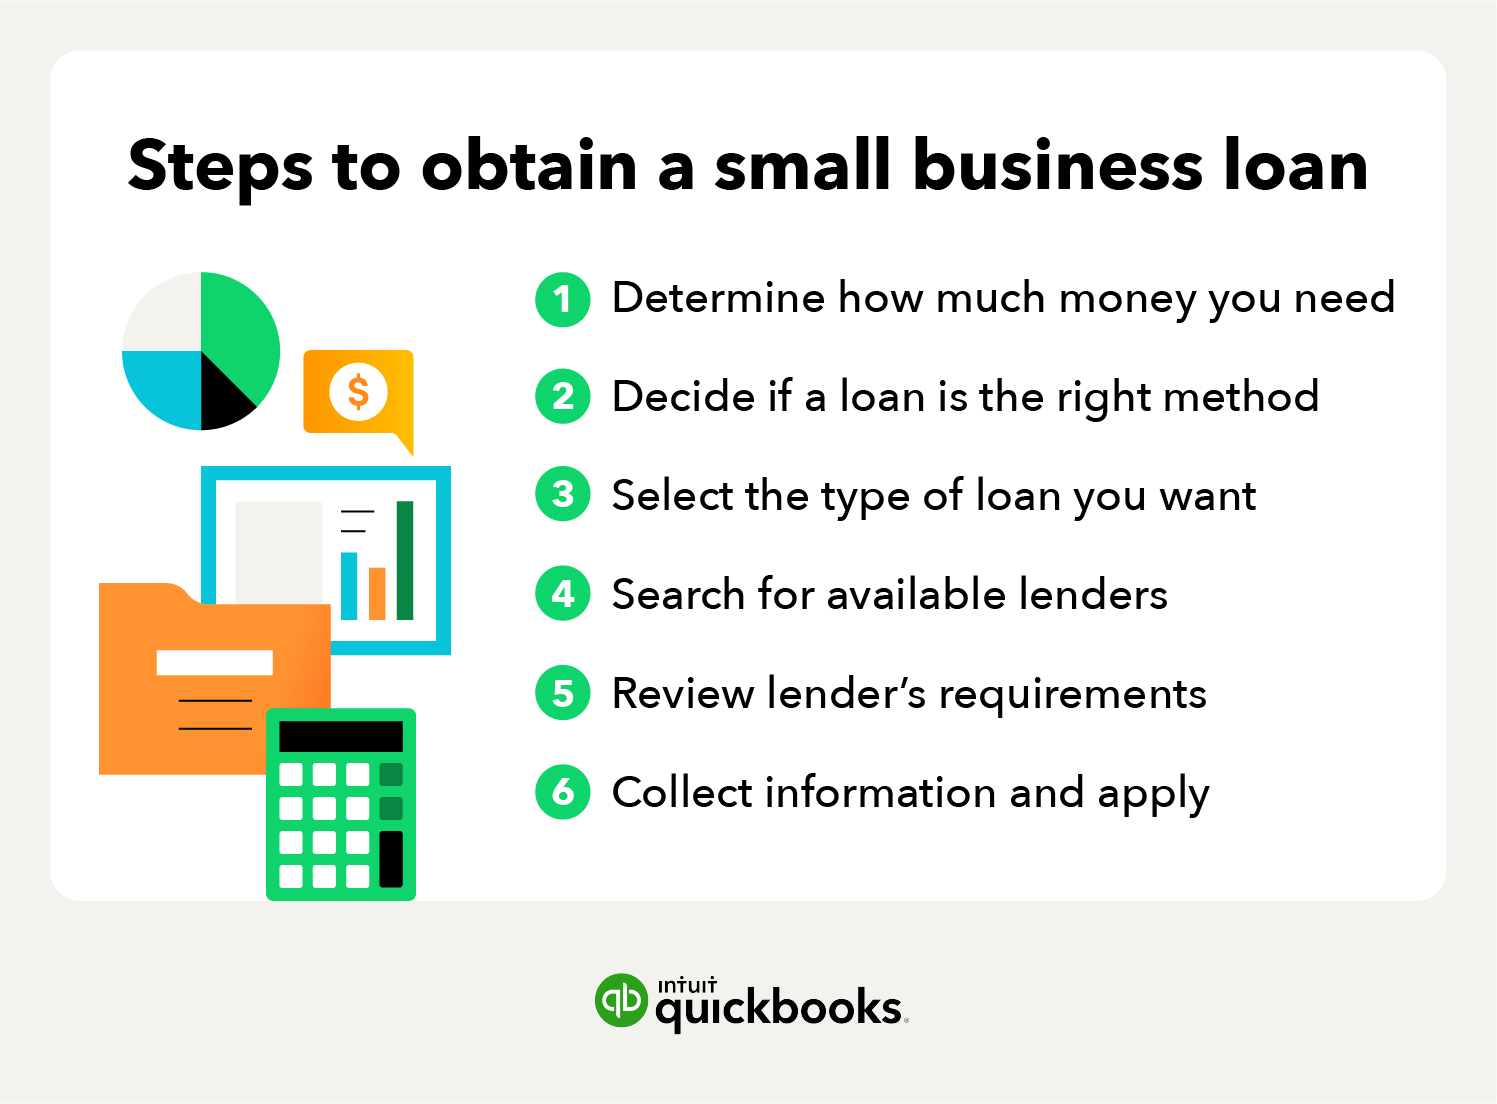 numbered steps to obtain a small business loan with a graph, calculator, money sign, and pie chart